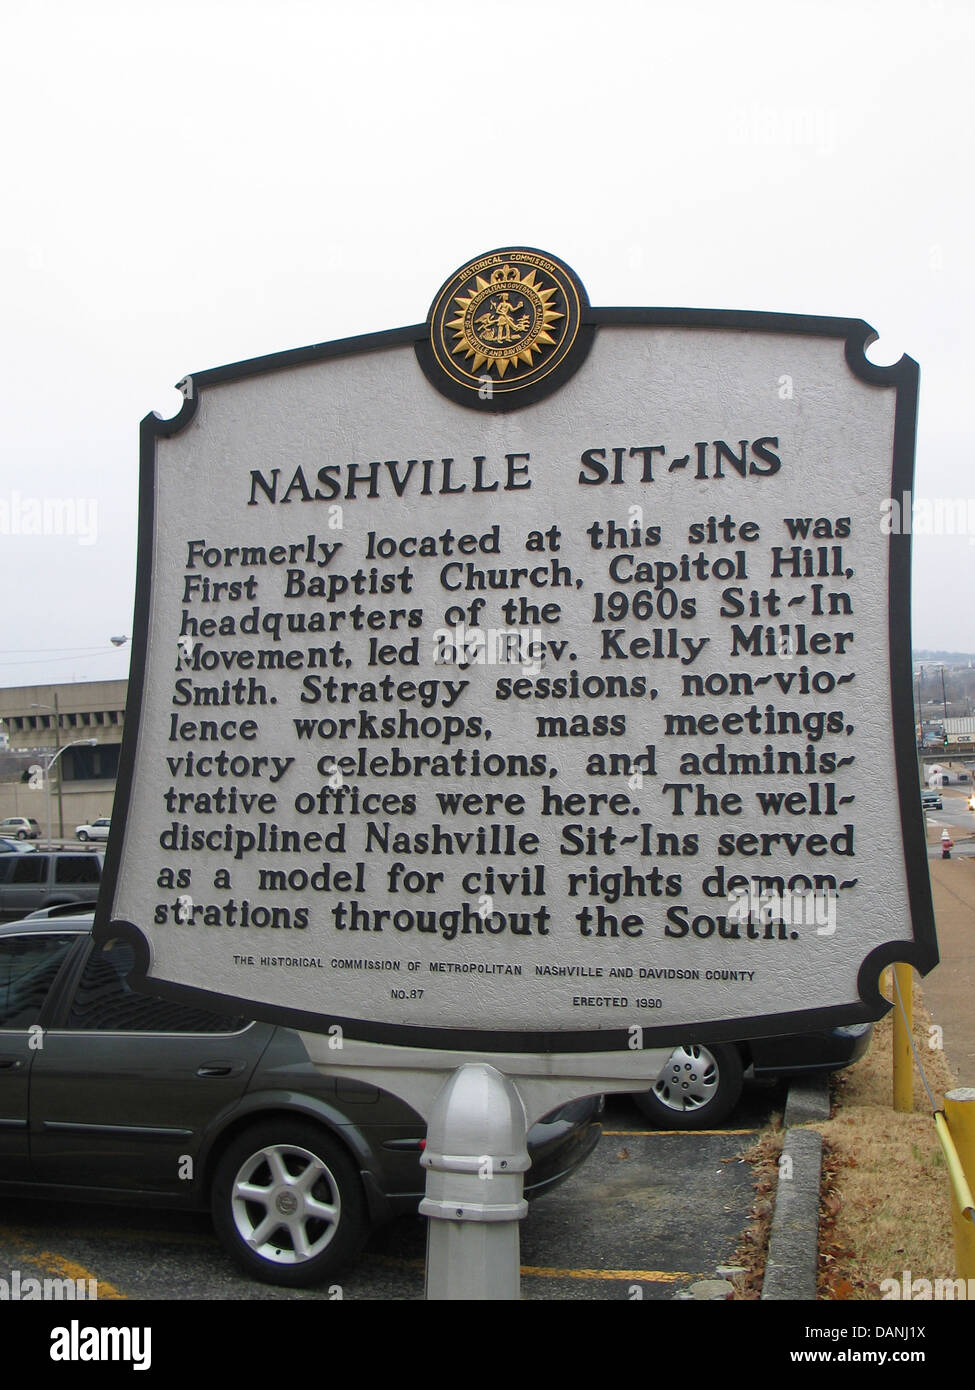 NASVHILLE SIT-INS Formerly located at this site was First Baptist Church, Capitol Hill, headquarters of the 1960s Sit-In Movement, led by Rev. Kelly Miller Smith. Strategy sessions, non-violence workshops, mass meetings, victory celebrations, and administrative offices were here. The well-disciplined Nashville Sit-Ins served as a model for civil rights demonstrations throughout the South. The Historical Commission of Metropolitan Nashville and Davidson County, Erected 1990 Stock Photo